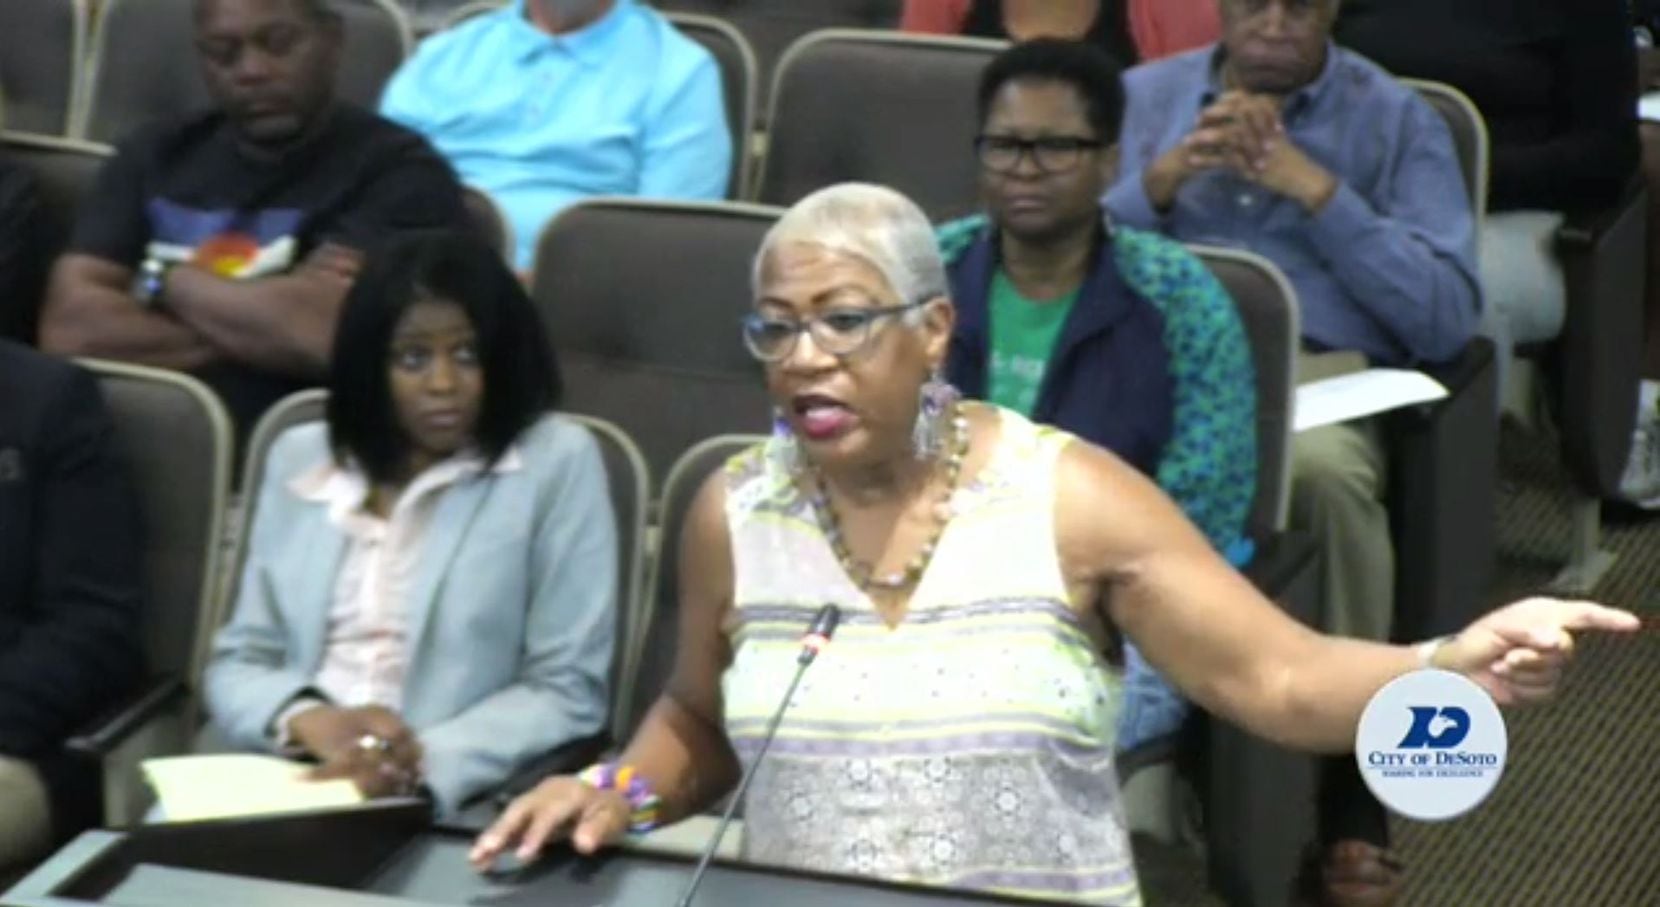 Precious Rita Davis asked the council to bring in an outside law enforcement to investigate the crime. 